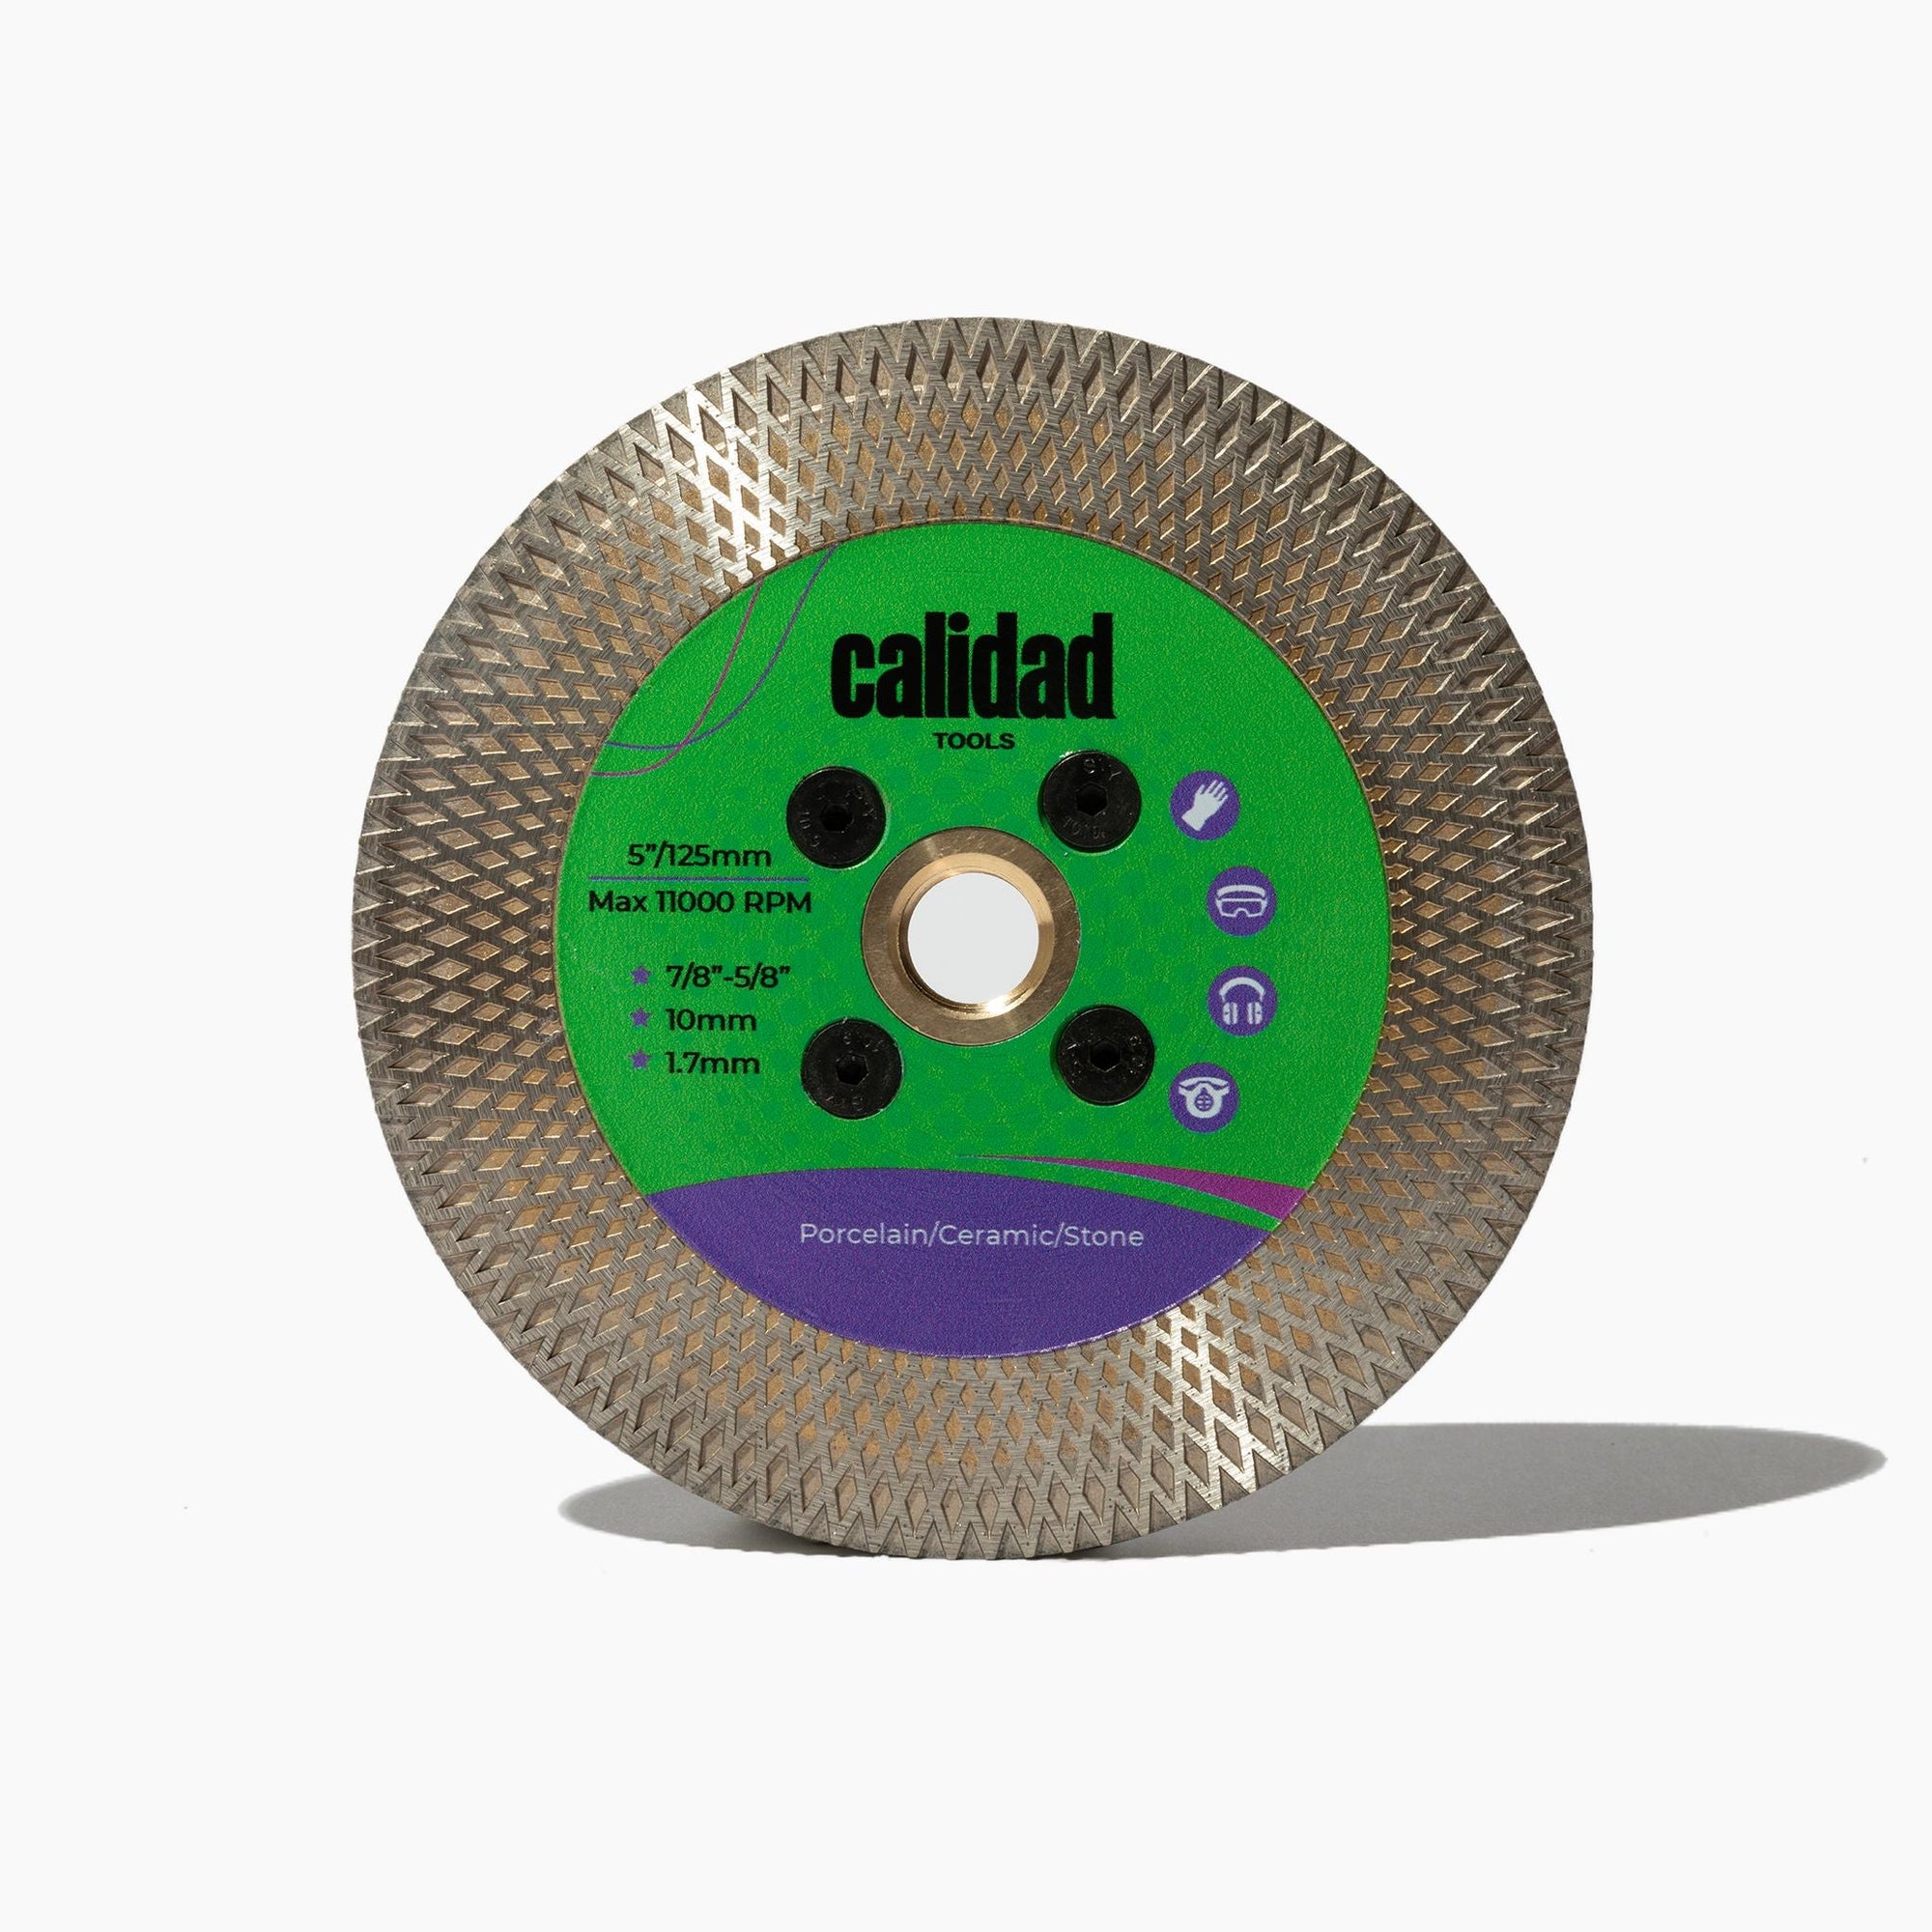 Calidad 5" Turbo Mesh Cutting & Shaping Grinder Blade “Durty Kurt" (with a Copper Flange) - Calidad Tools